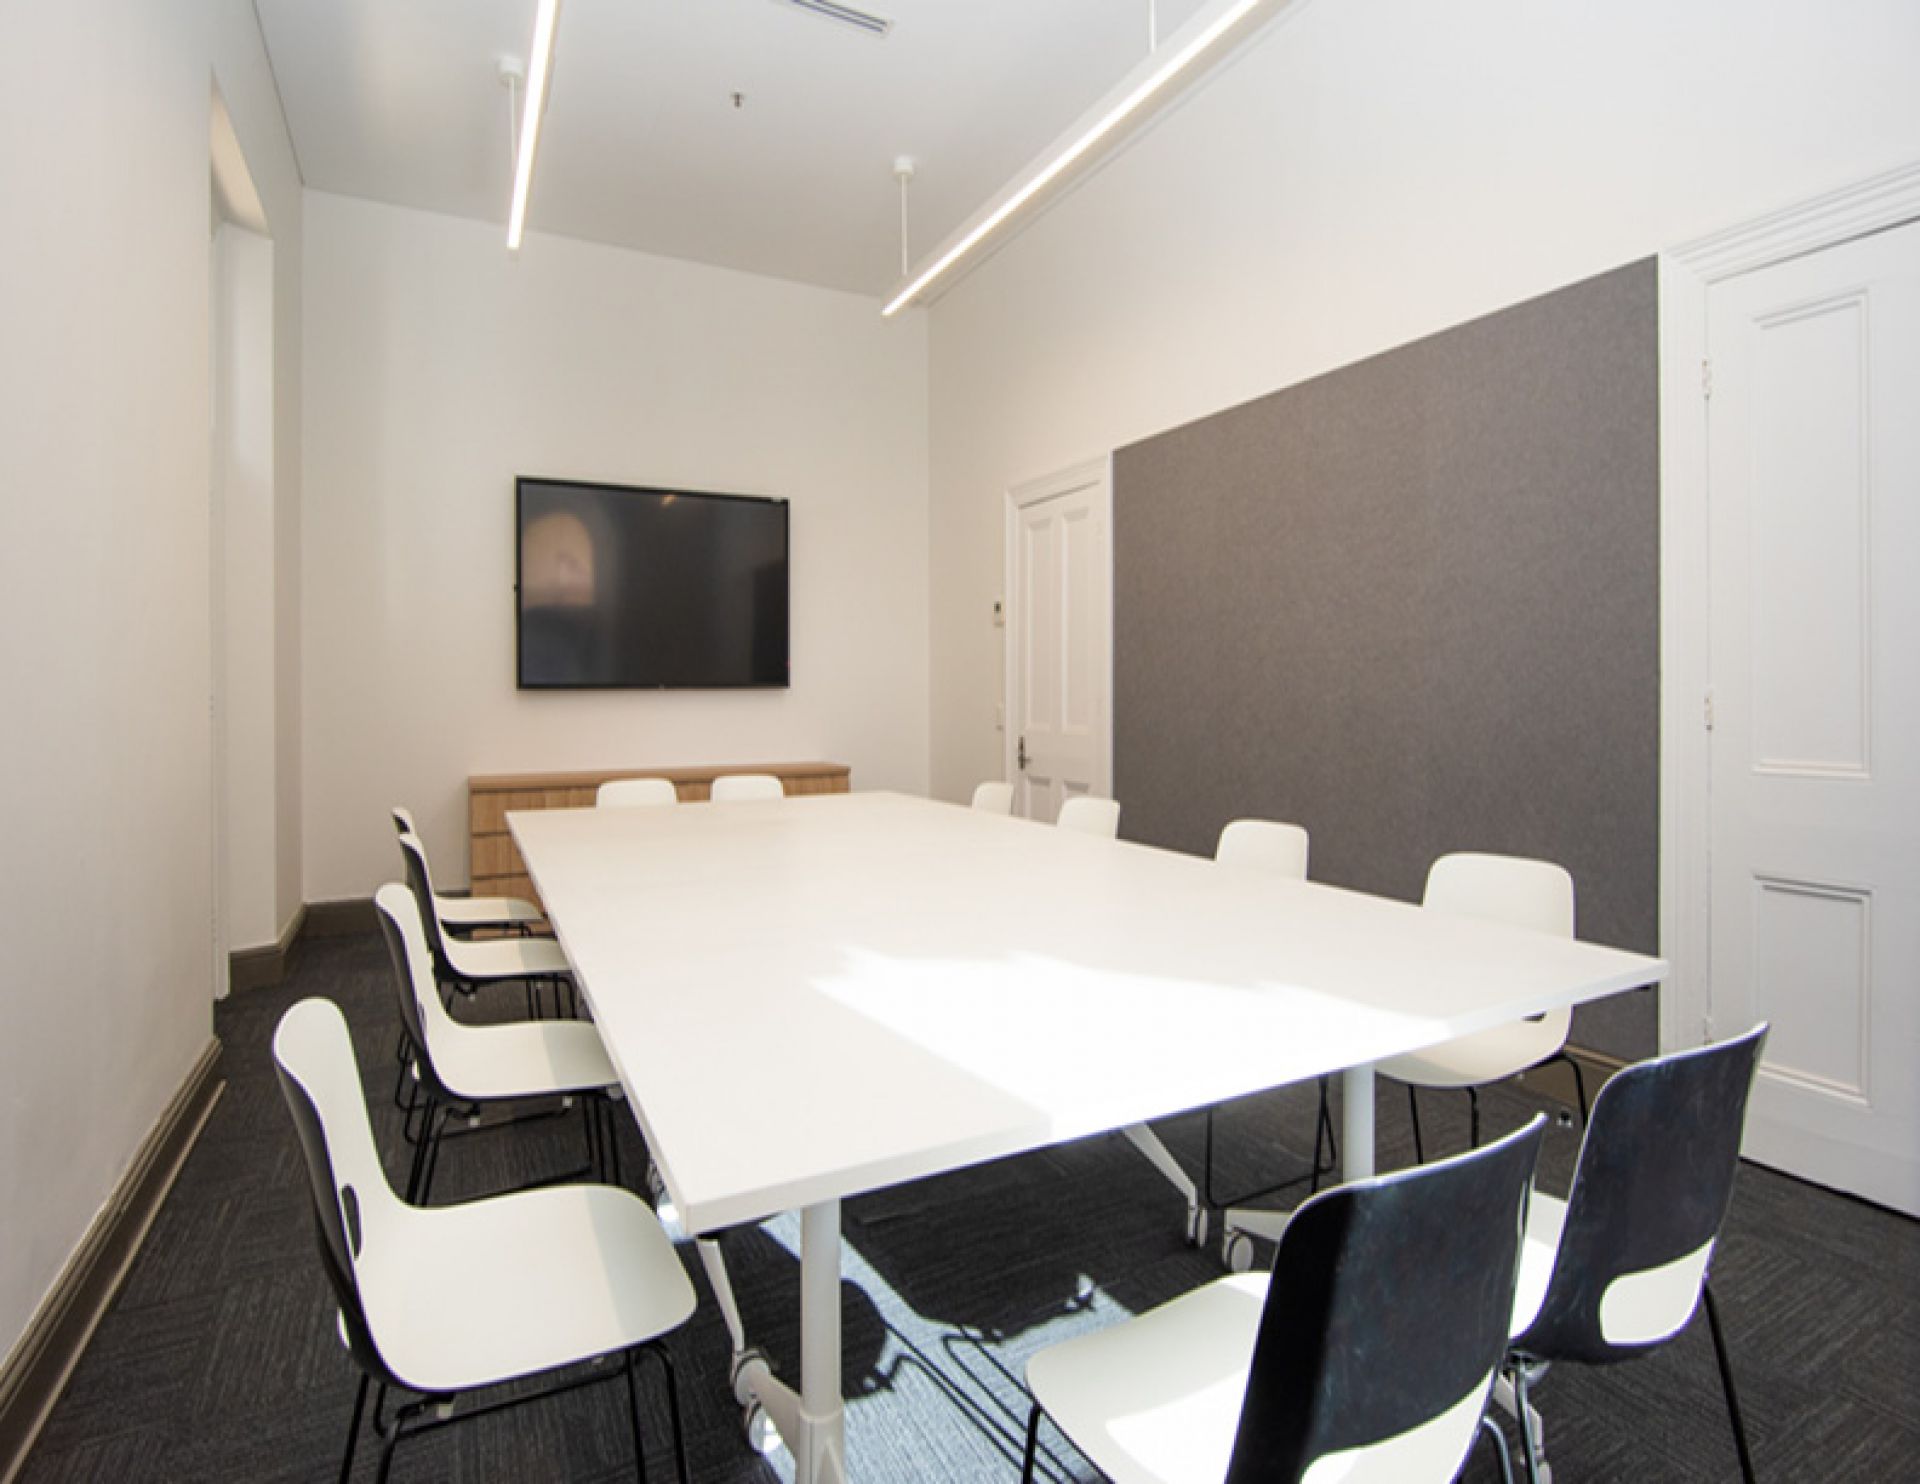 Town Hall Meeting Room G.3 - Boardroom set-up